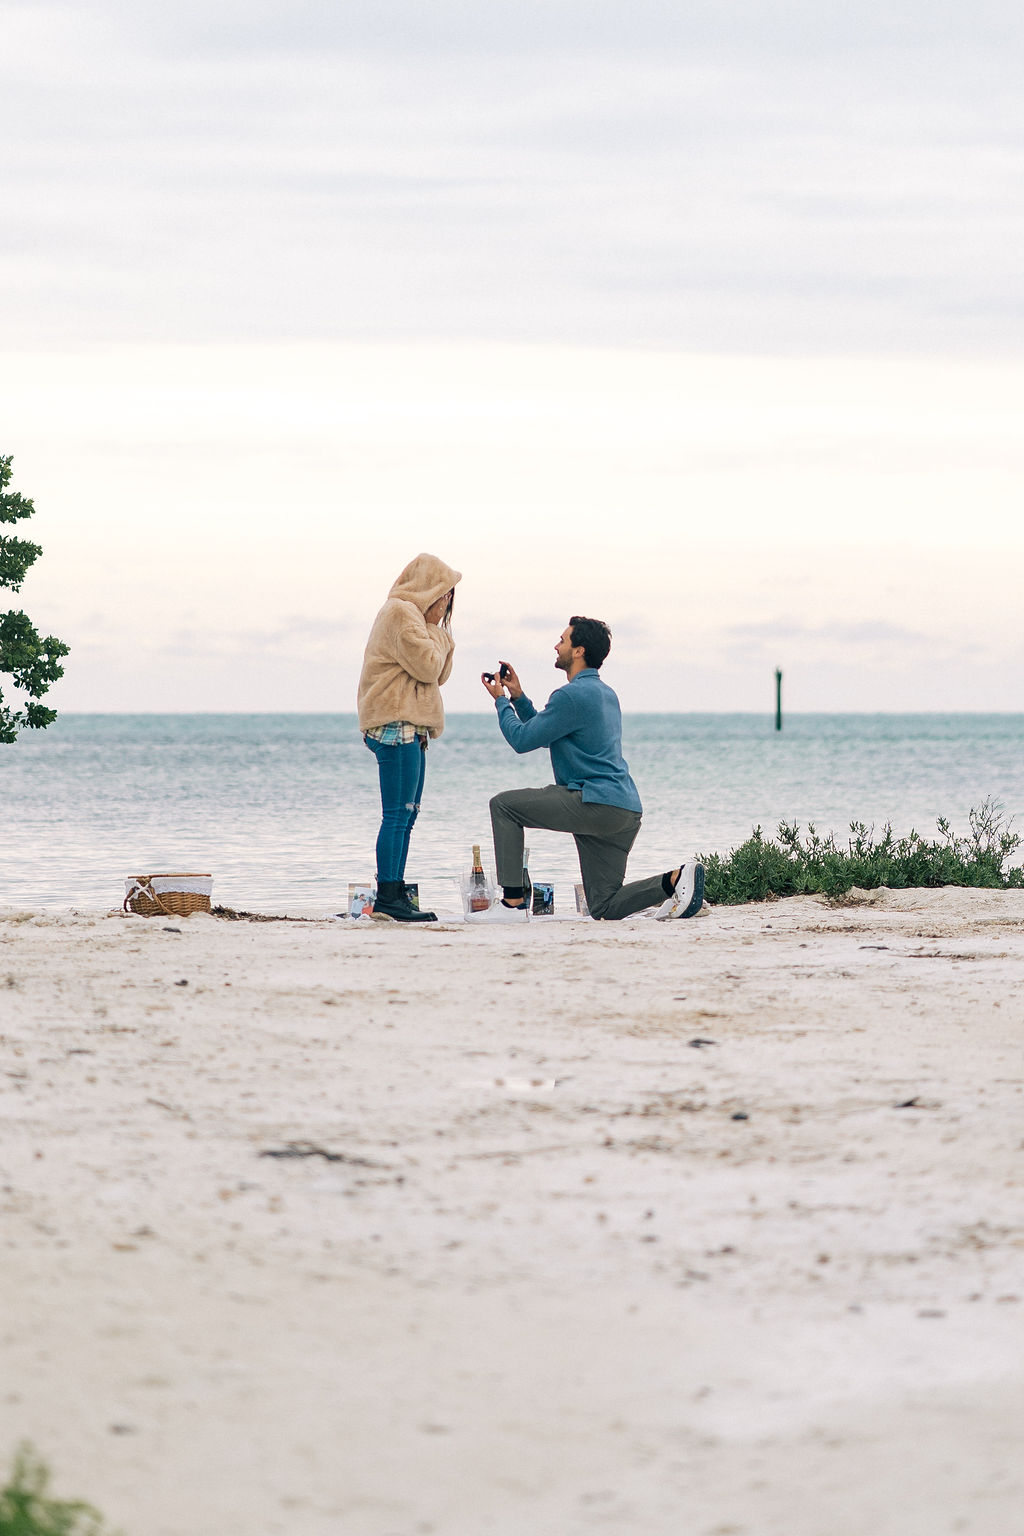 Photo from Devin and Emily's Beach Proposal